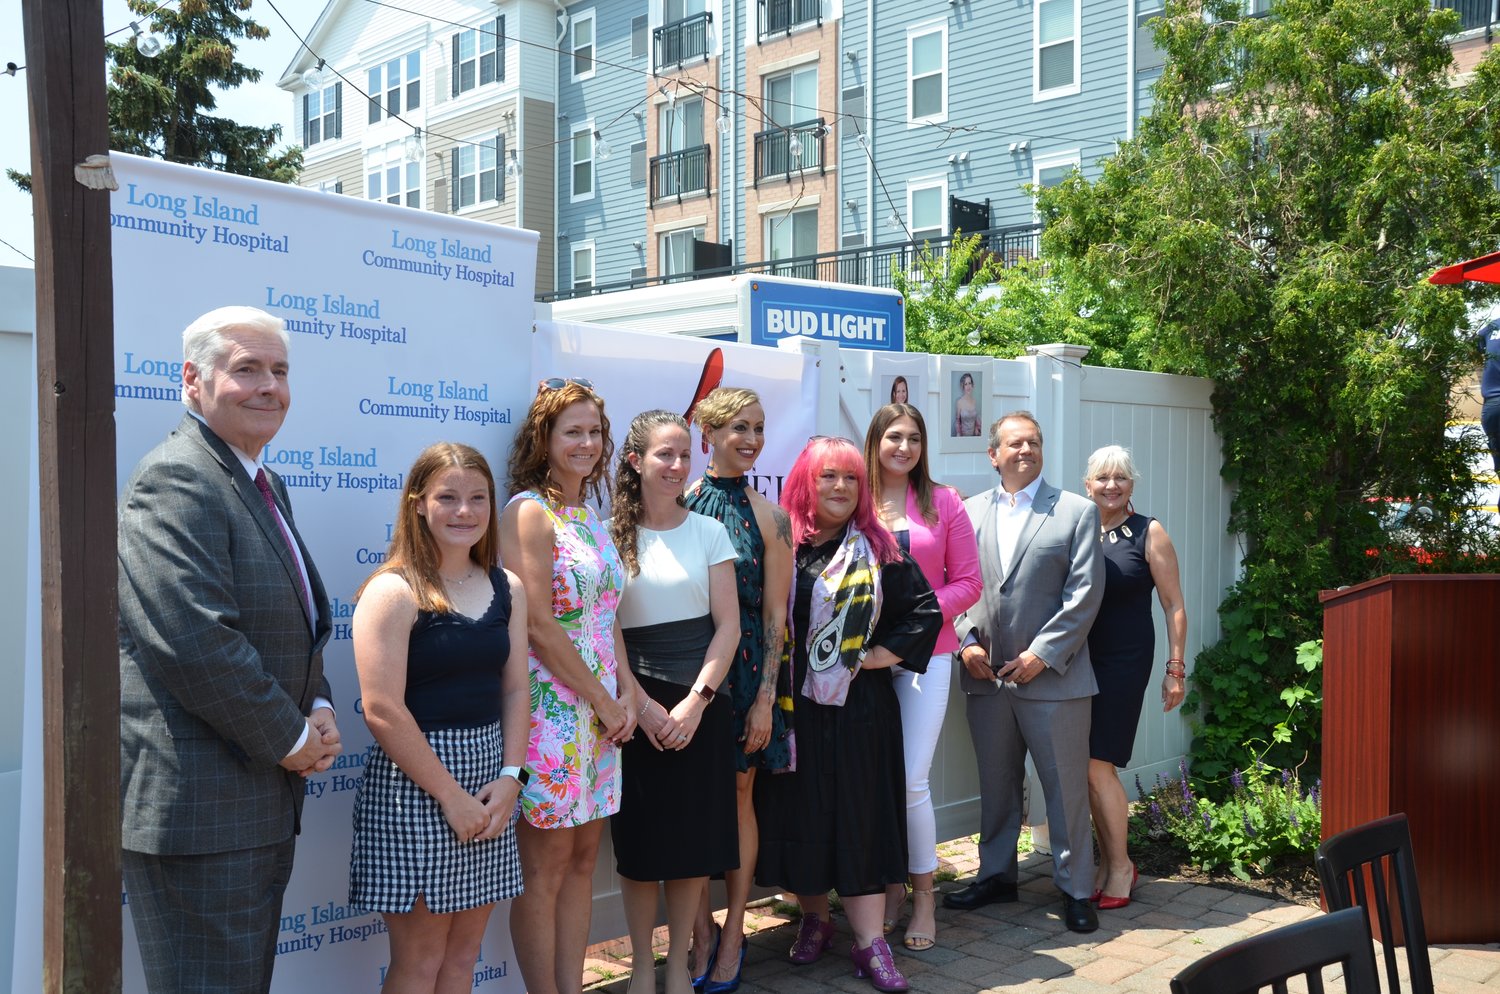 From left to right Long Island Community Hospital President and CEO Richard T. Margulis, scholarship recipient Madison Eddington, honoree Kourtney Bevis, honoree Michelle Miller-McEvoy, honoree Michele Cayea, honoree Beth Giacummo, scholarship recipient Julia James Katz, Executive Director of the Patchogue Chamber David Kennedy and event founder Kathy Fallon.